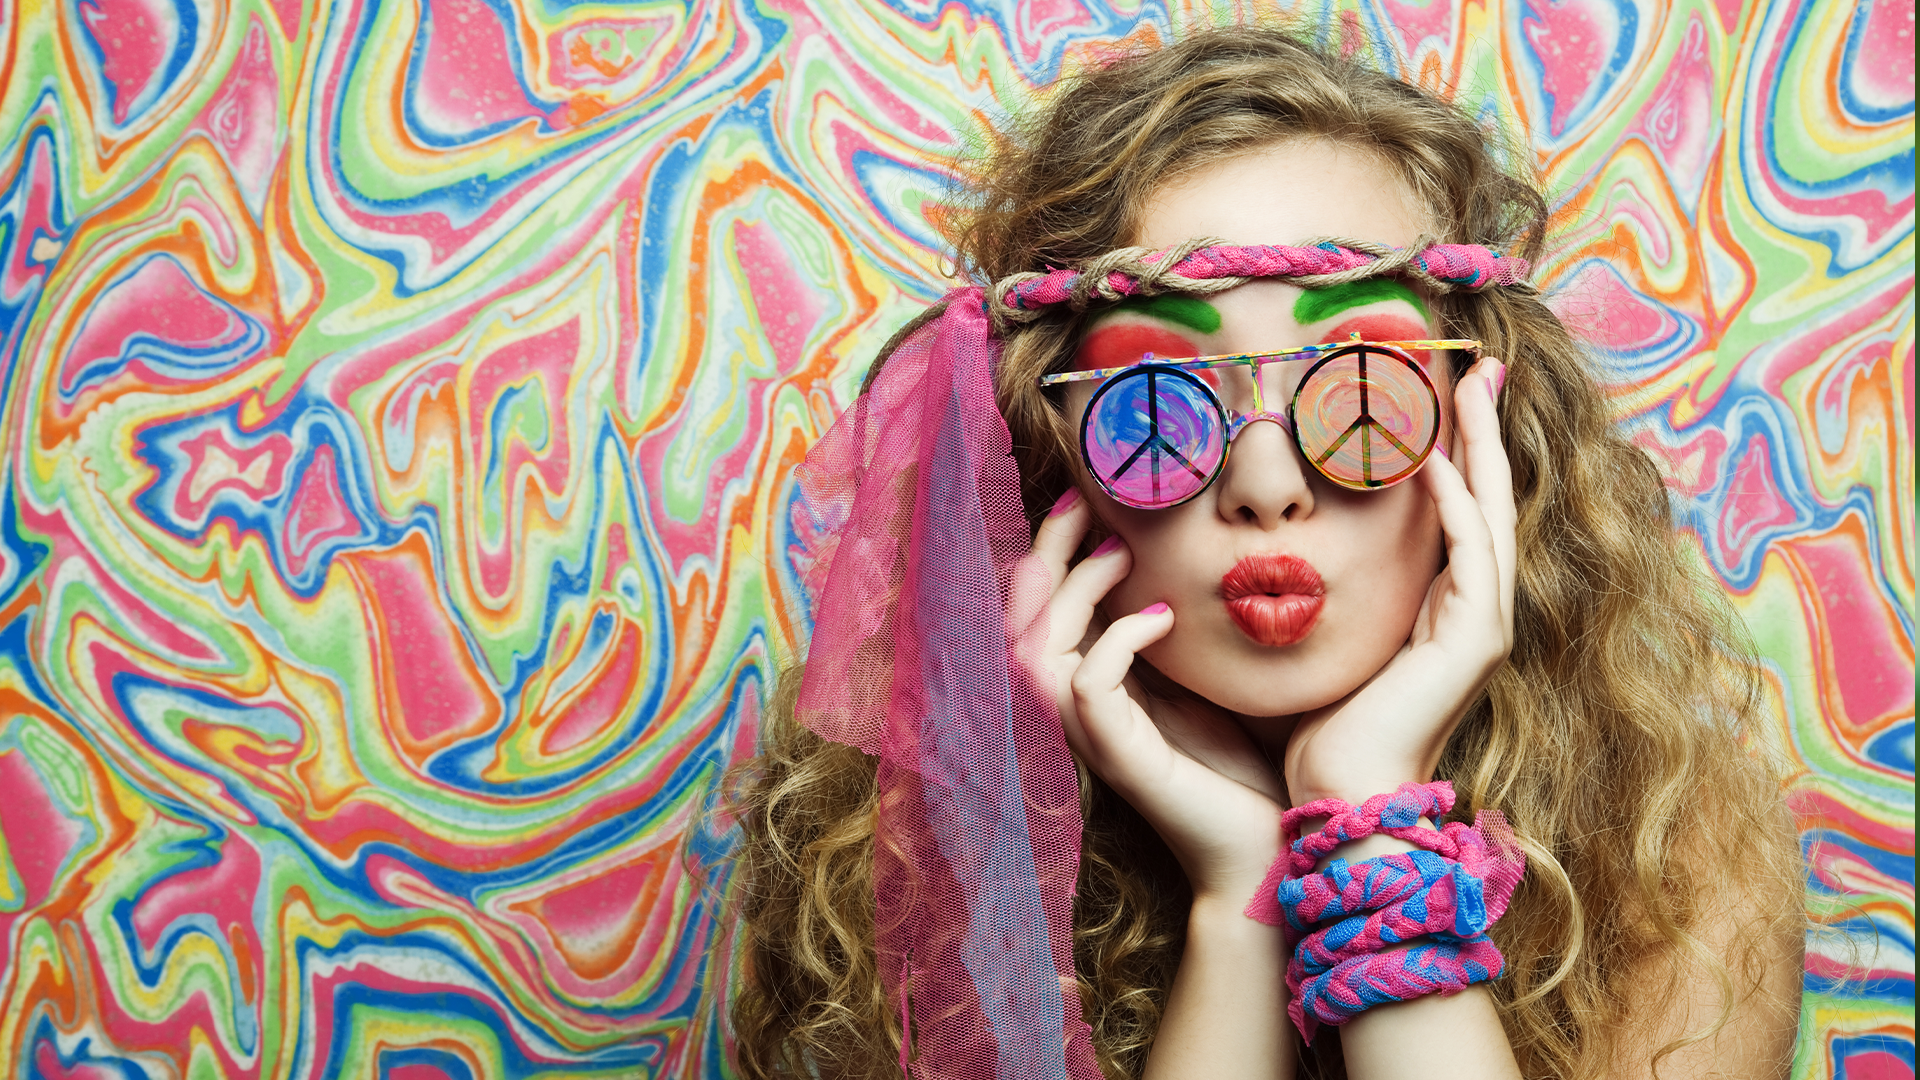 Hippy girl with peace symbol sunglasses